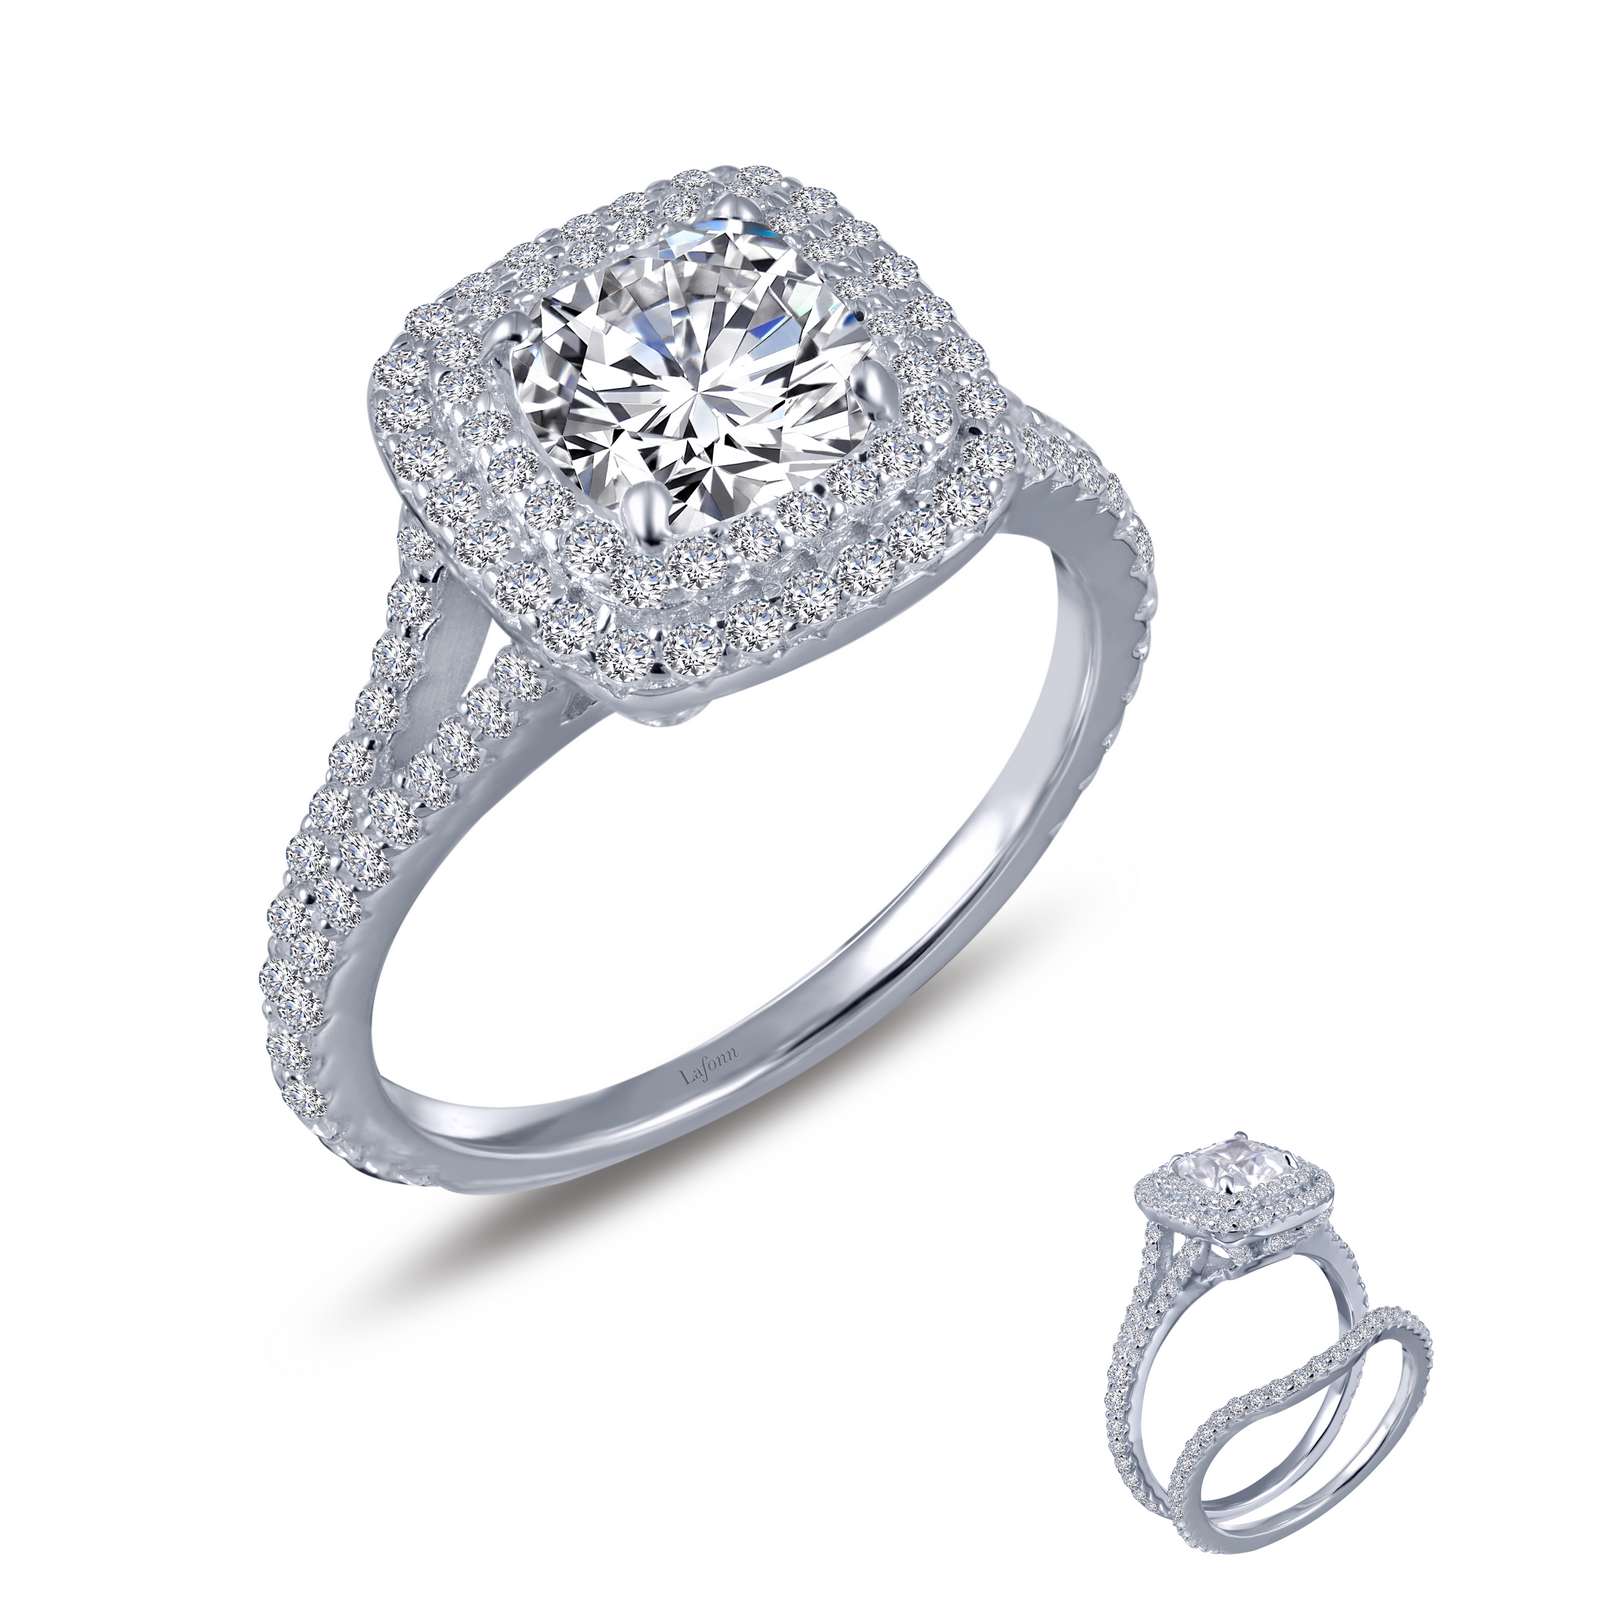 Double-Halo Engagement Ring Griner Jewelry Co. Moultrie, GA